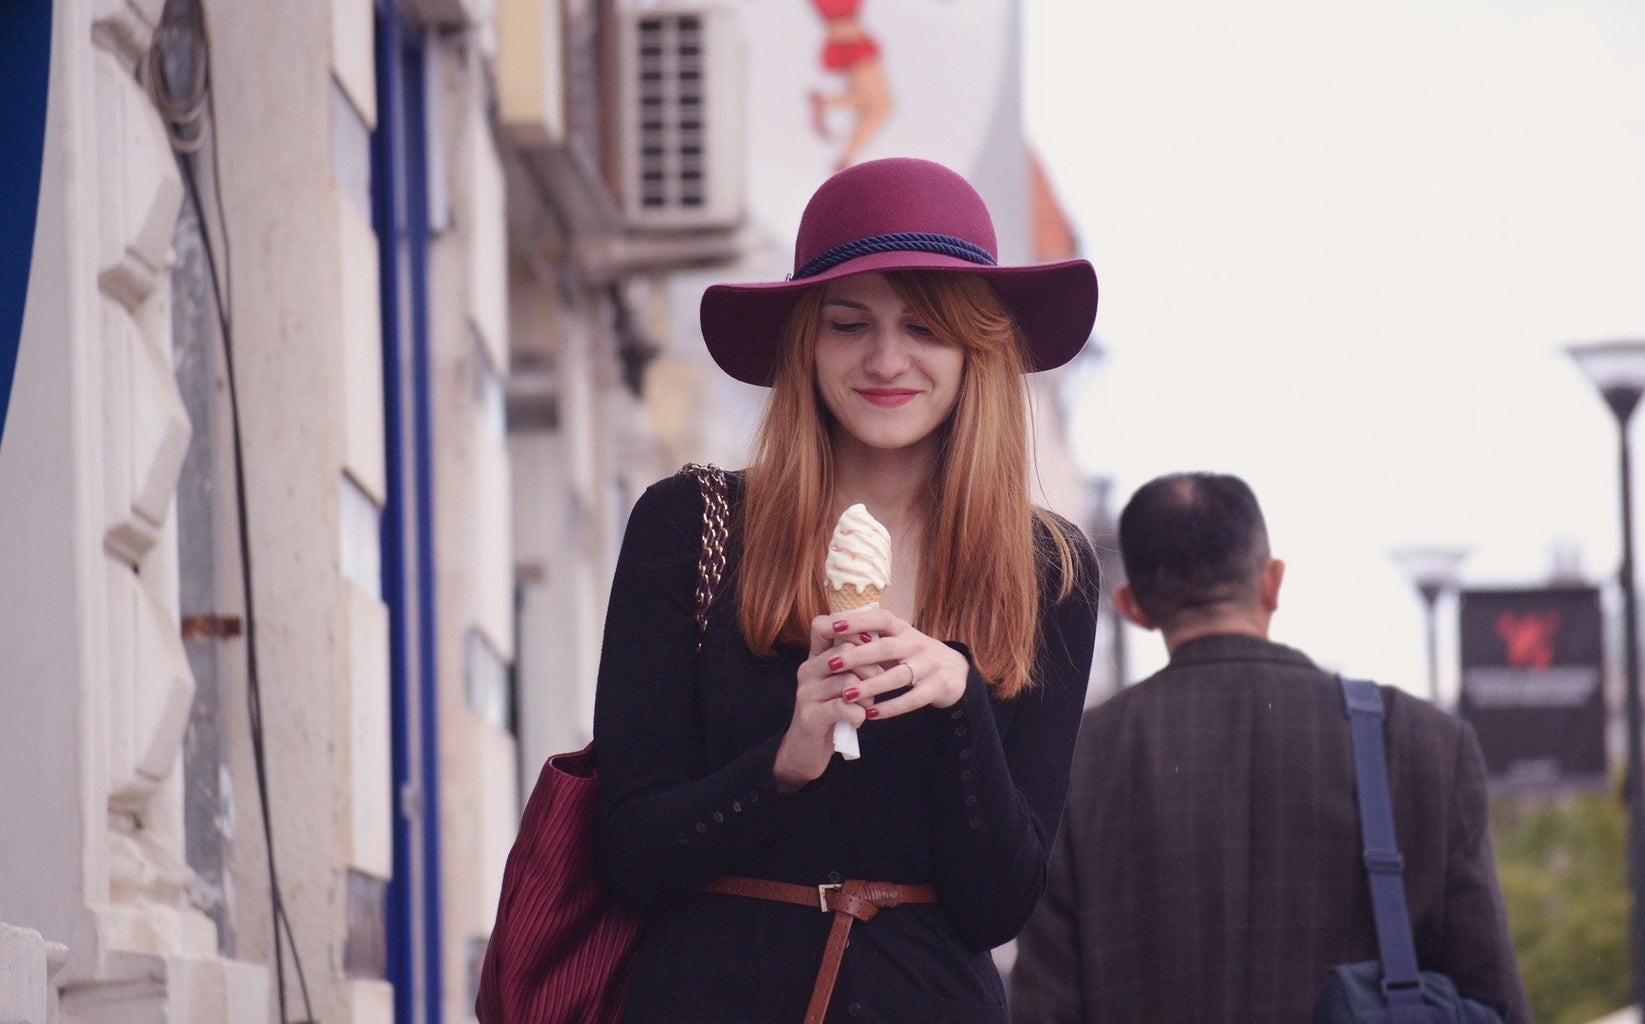 woman with ice cream 2004777 1920?width=1024&height=1024&fit=cover&auto=webp